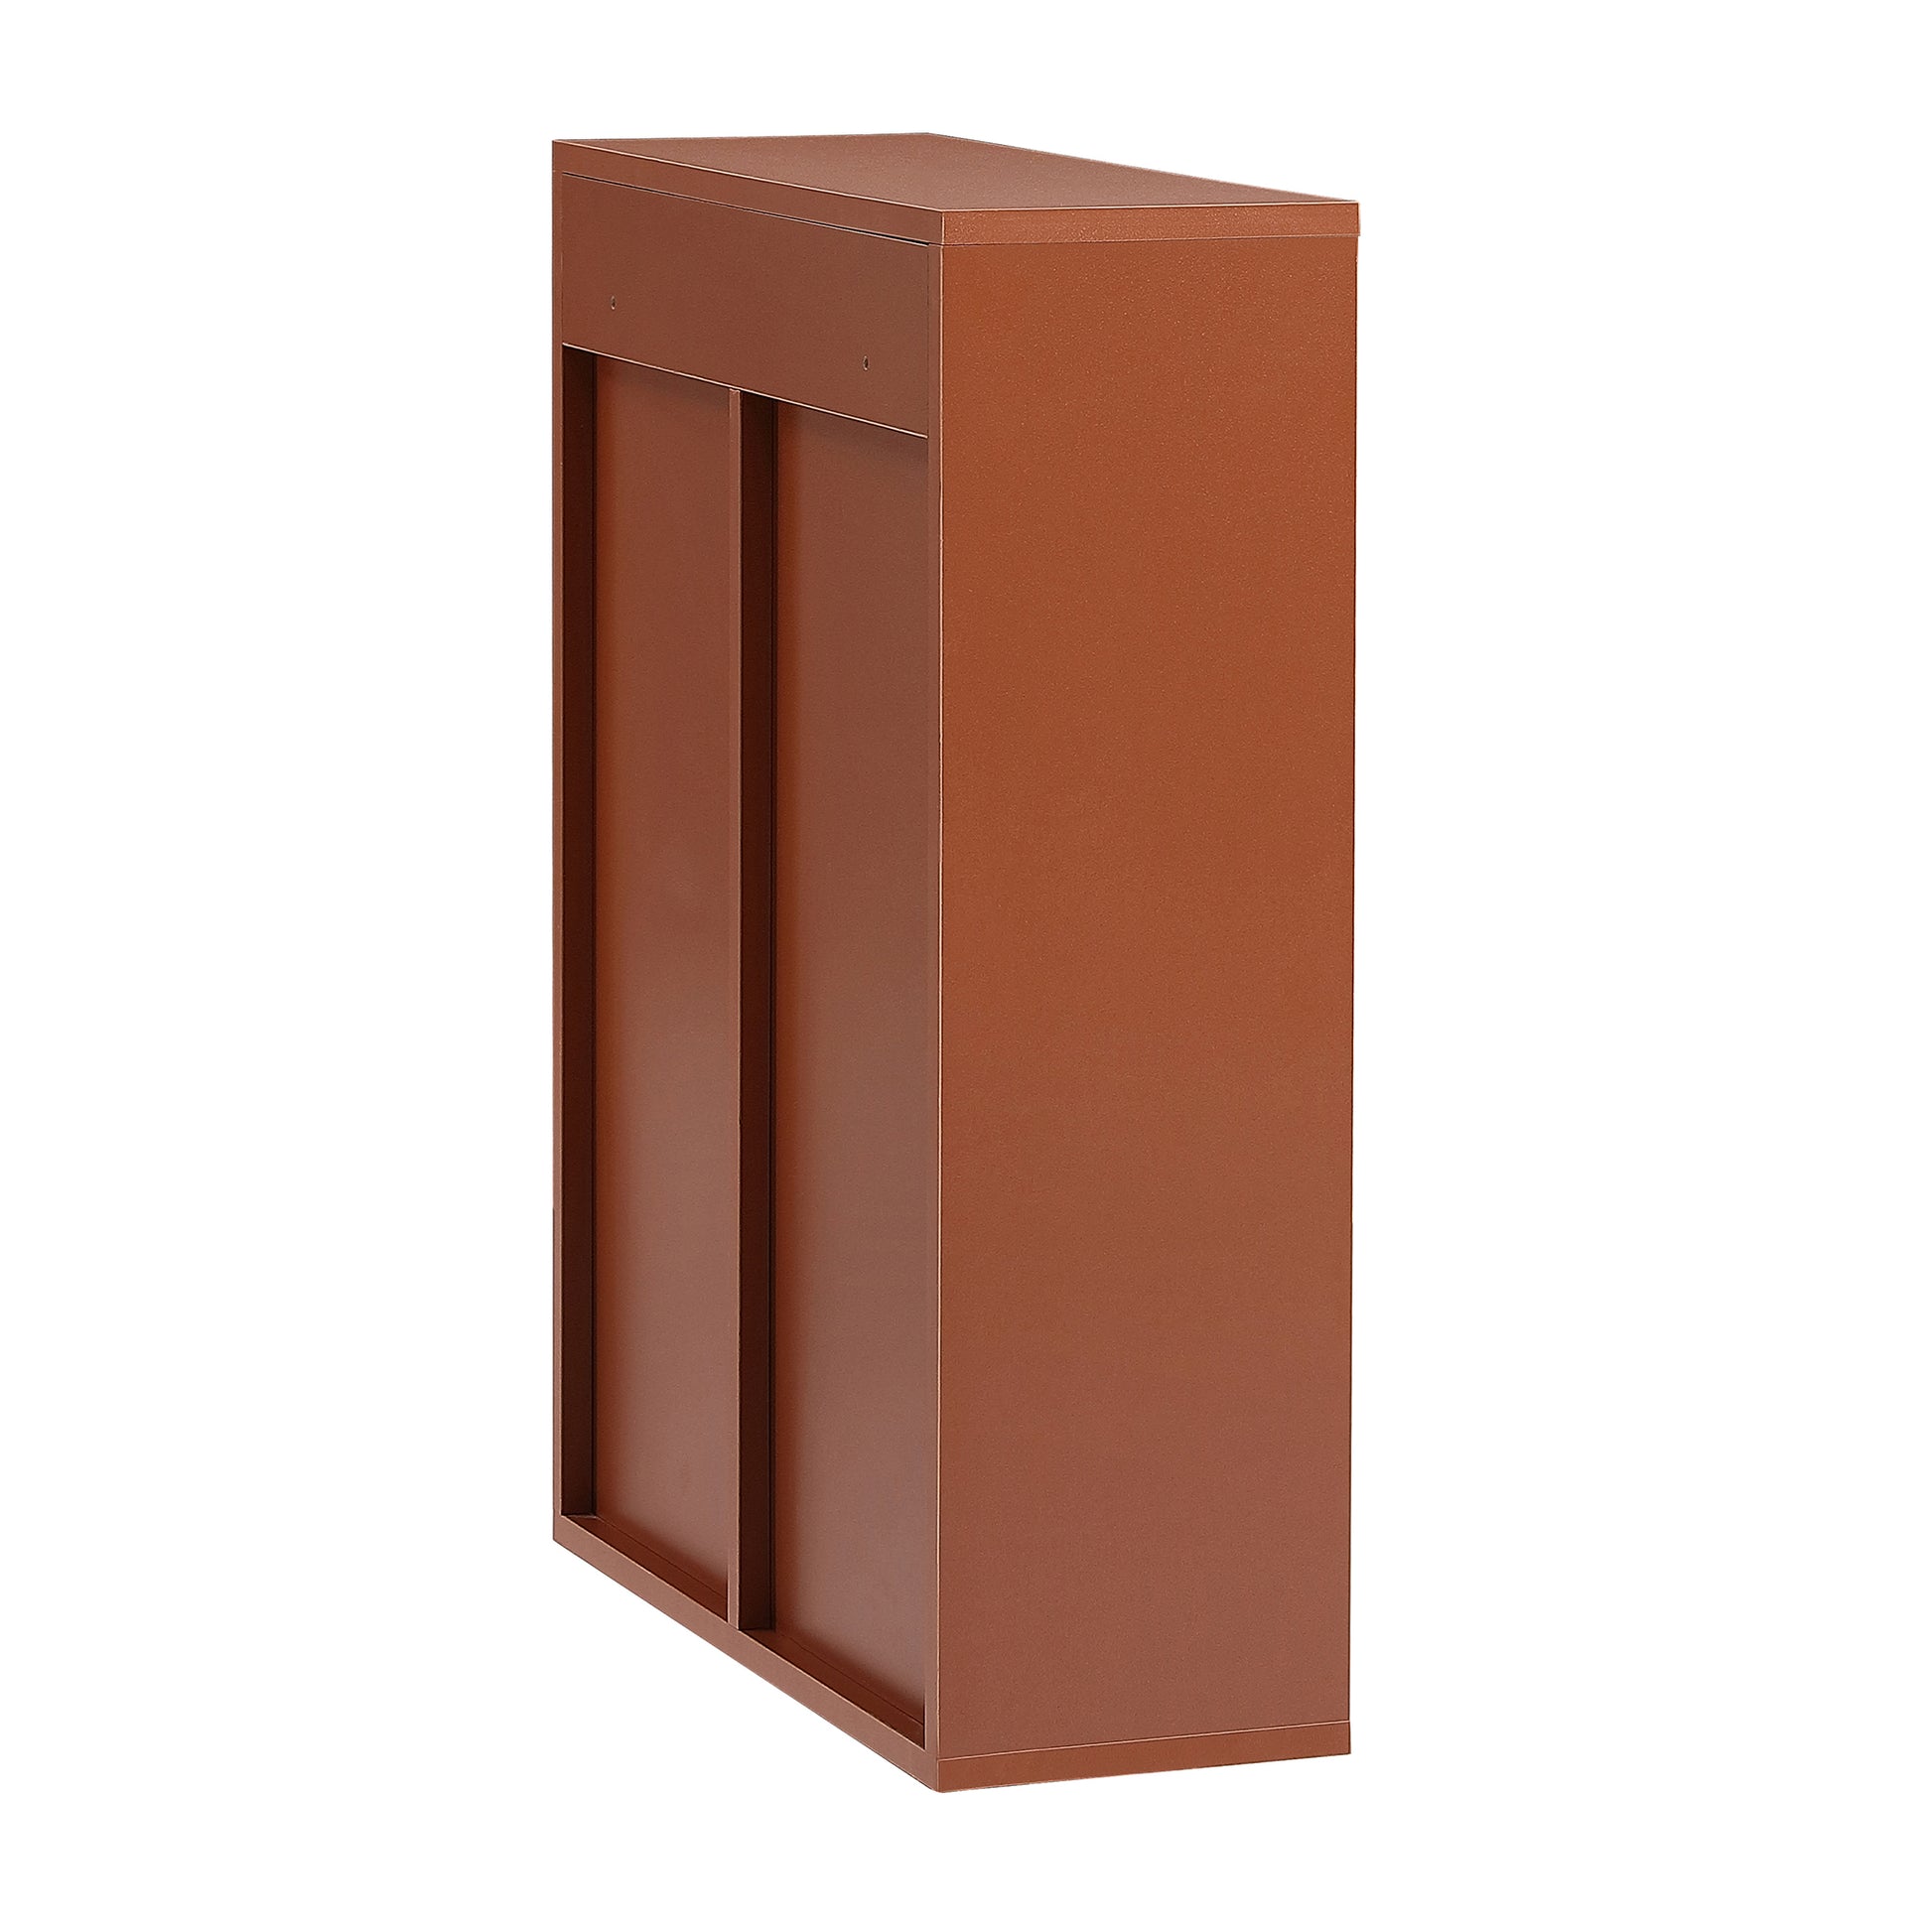 Wood wall mounted storage cabinet, 5 layer toilet espresso-mdf